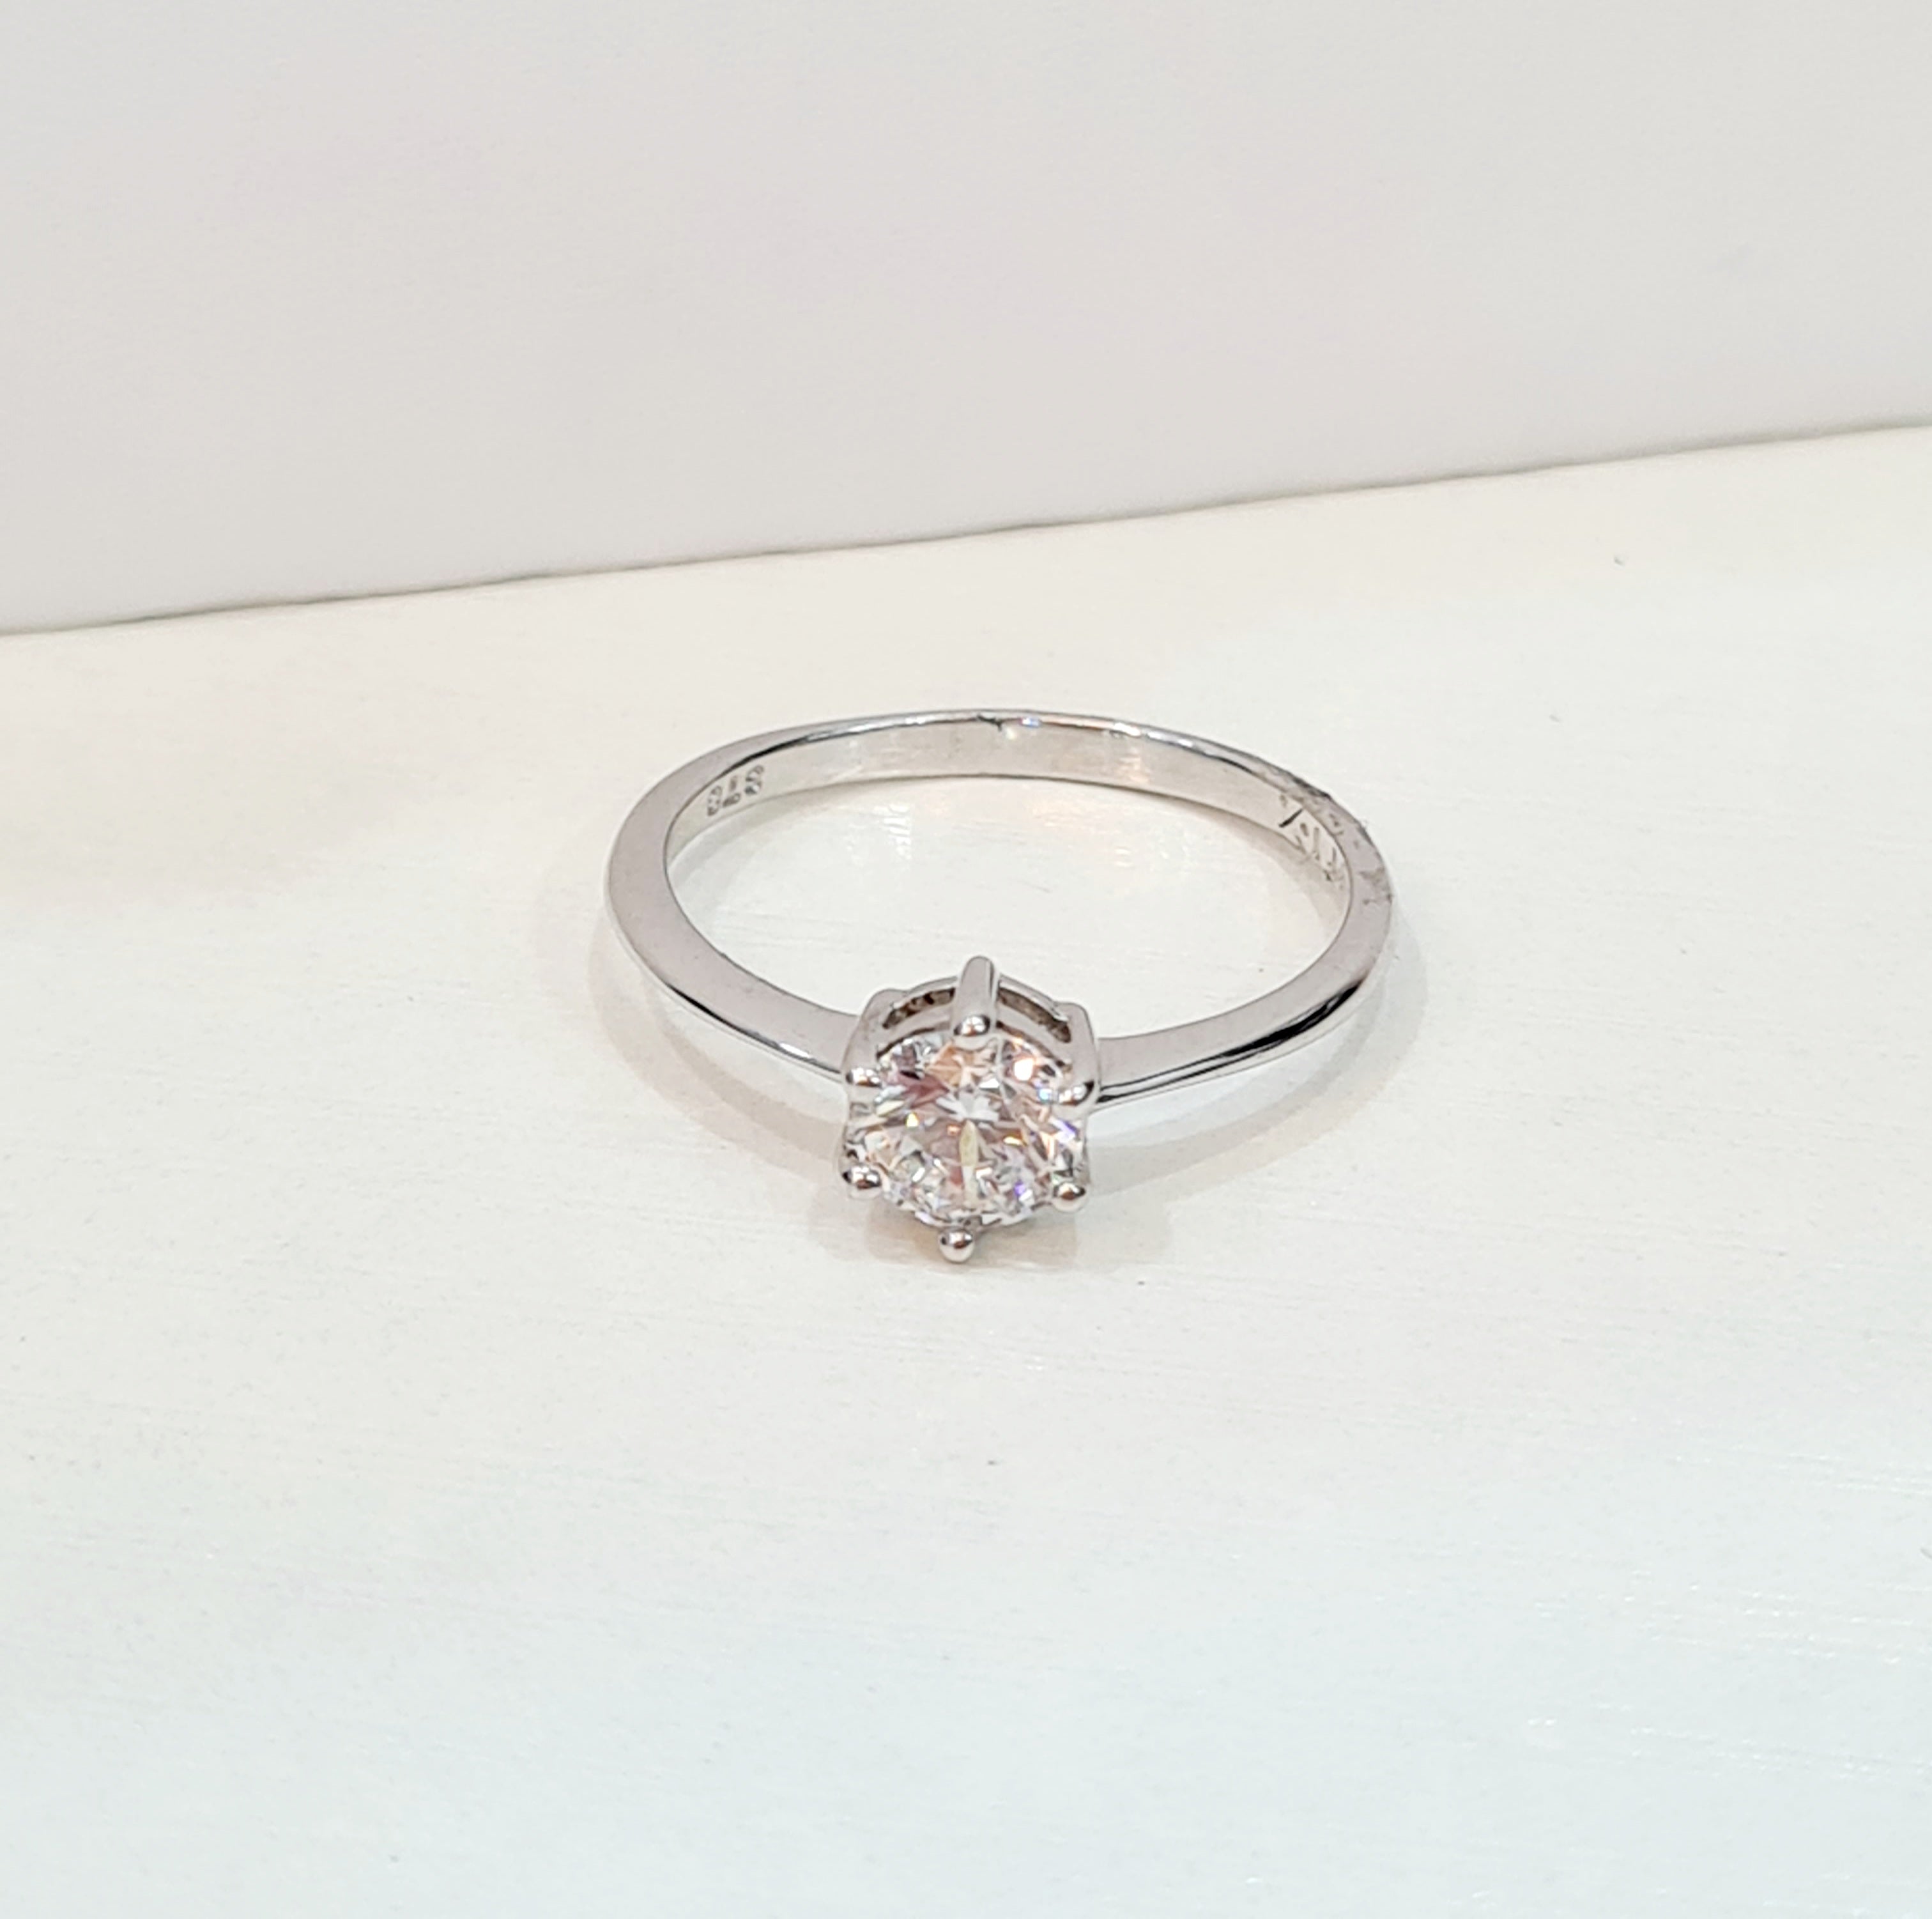 Sparkling 0.63 carats Solitaire Ring